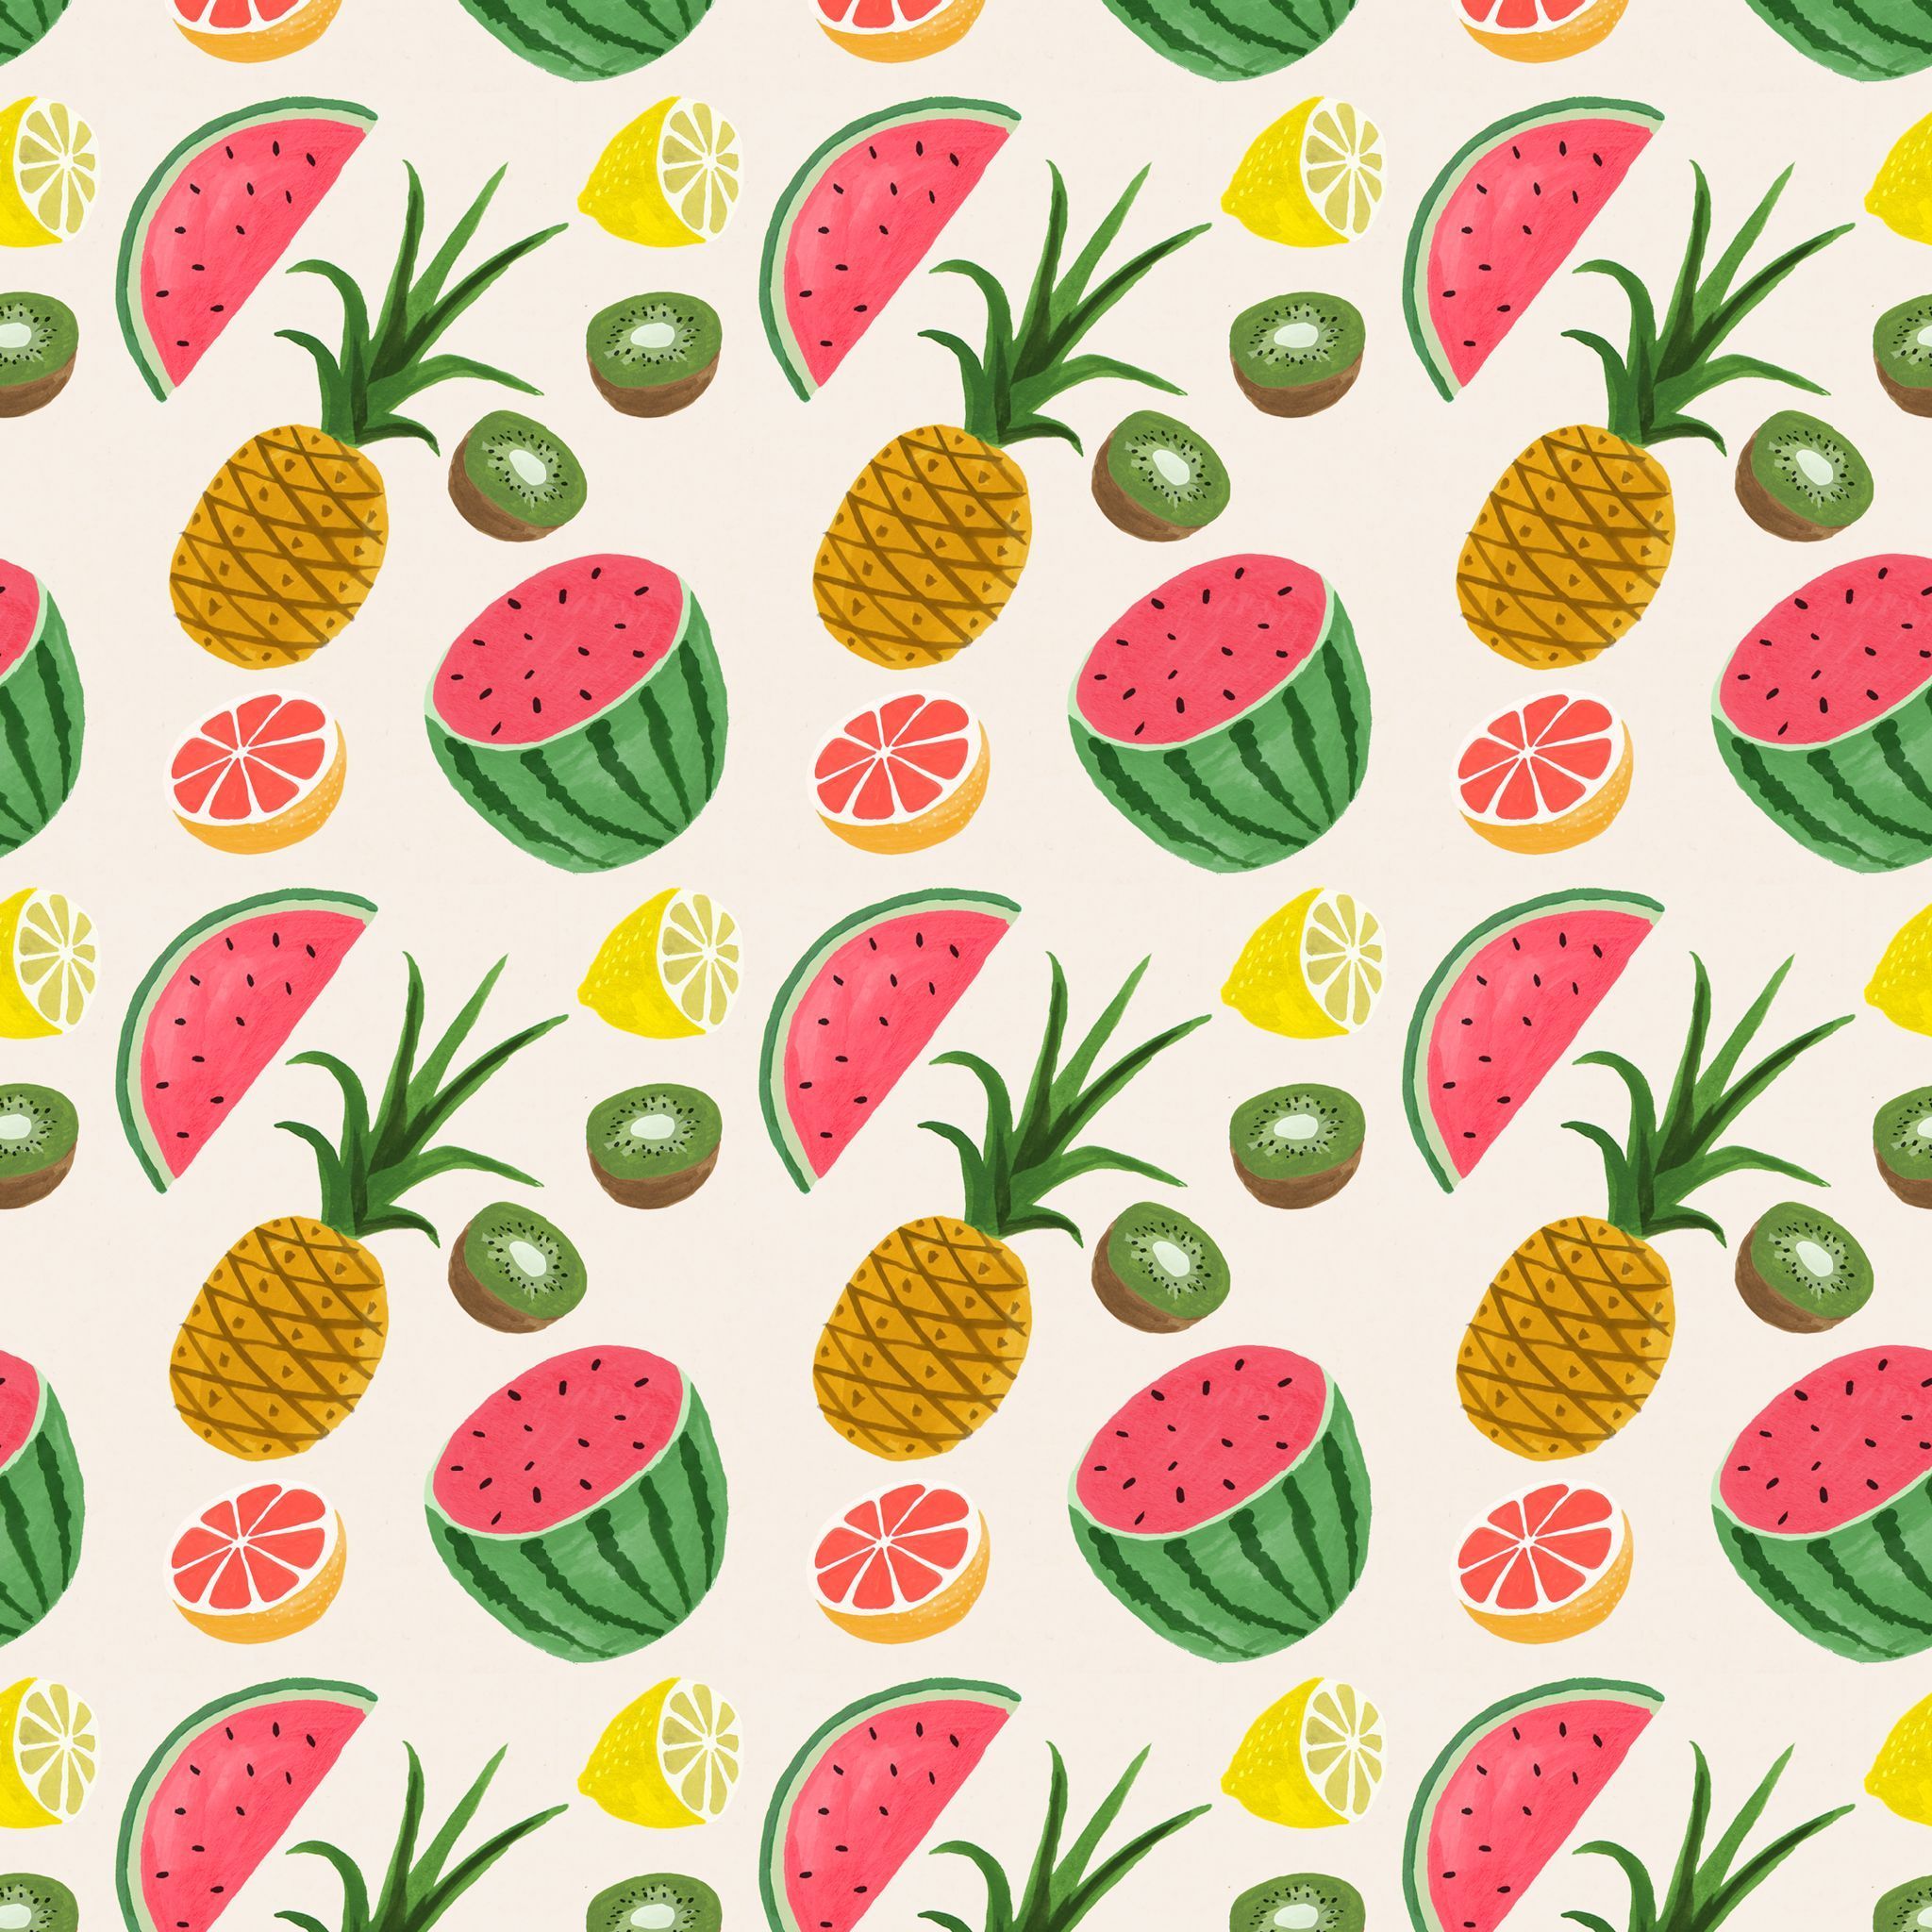 A repeating pattern of watermelon, pineapple, kiwi, and grapefruit. - Fruit